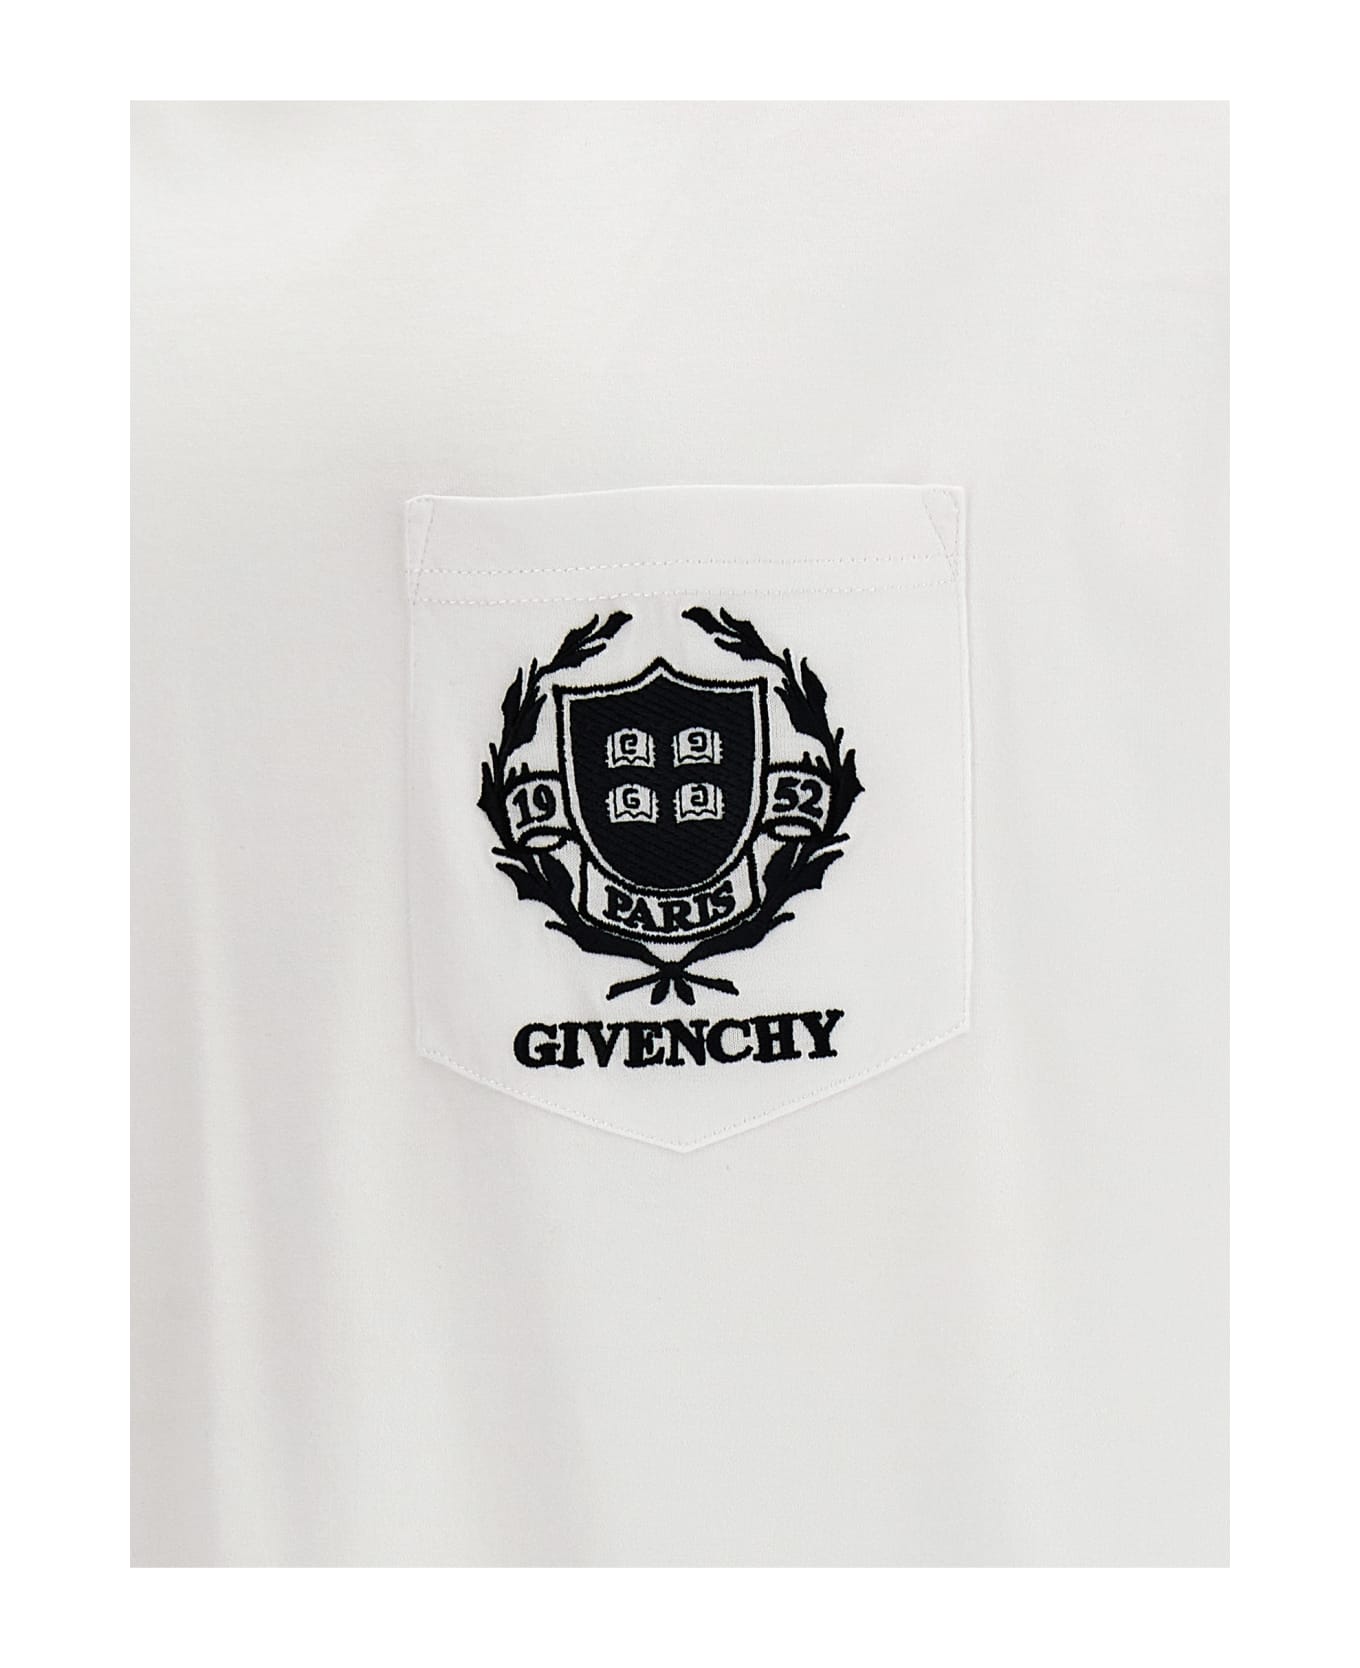 Givenchy Logo Embroidery T-shirt - White